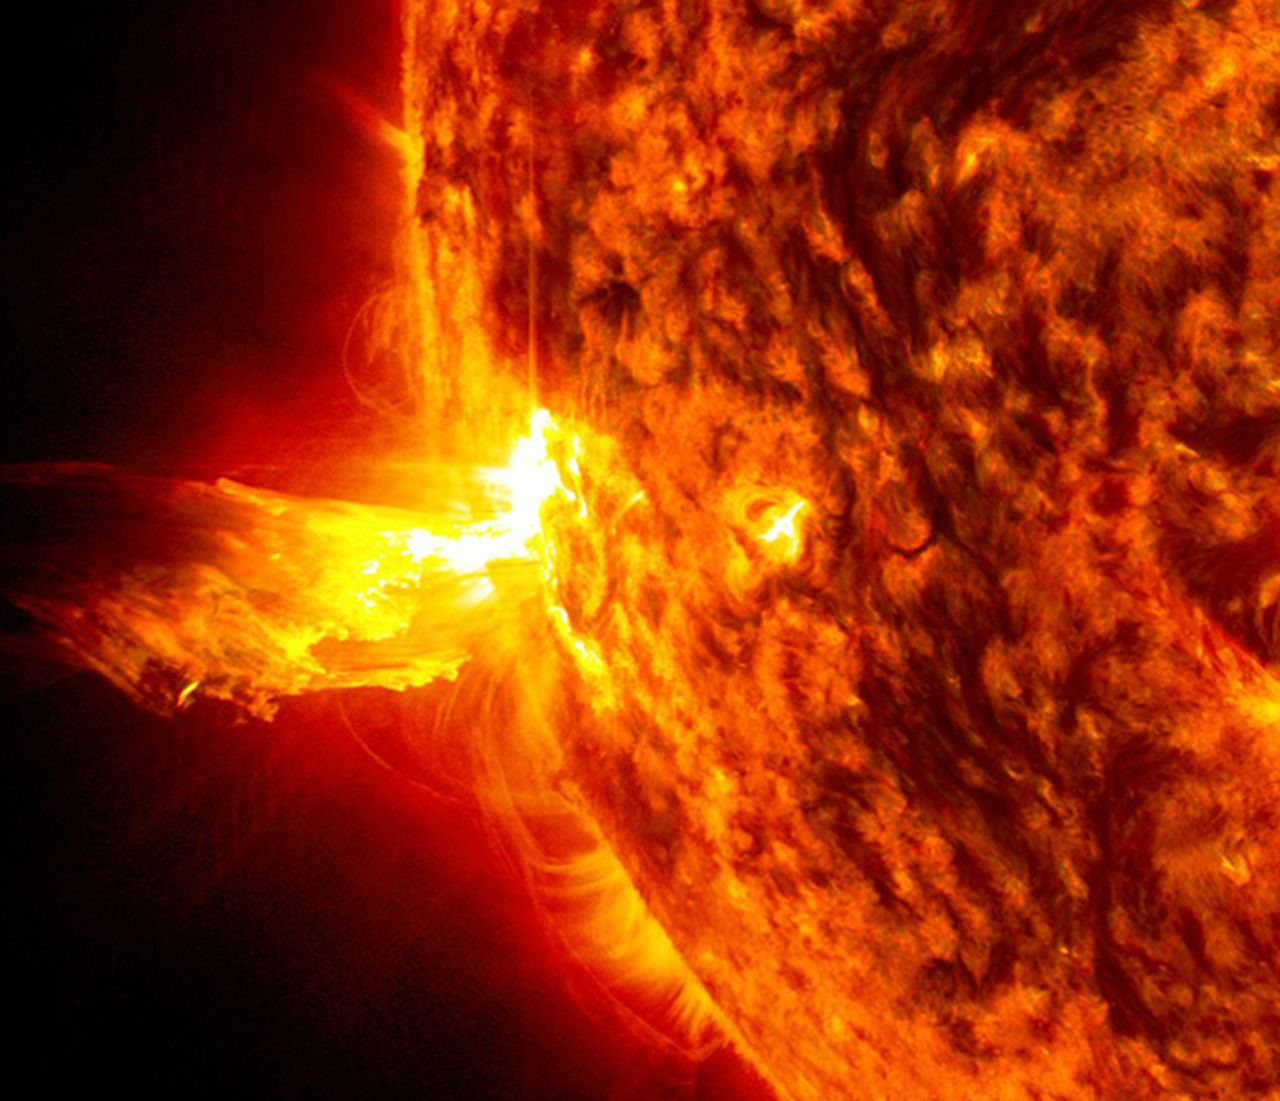 Space weather experts are warning that a solar storm could strike Earth this week -- could mean the disruption of electrical generation systems, the electric grid, satellite communications and radio signals.